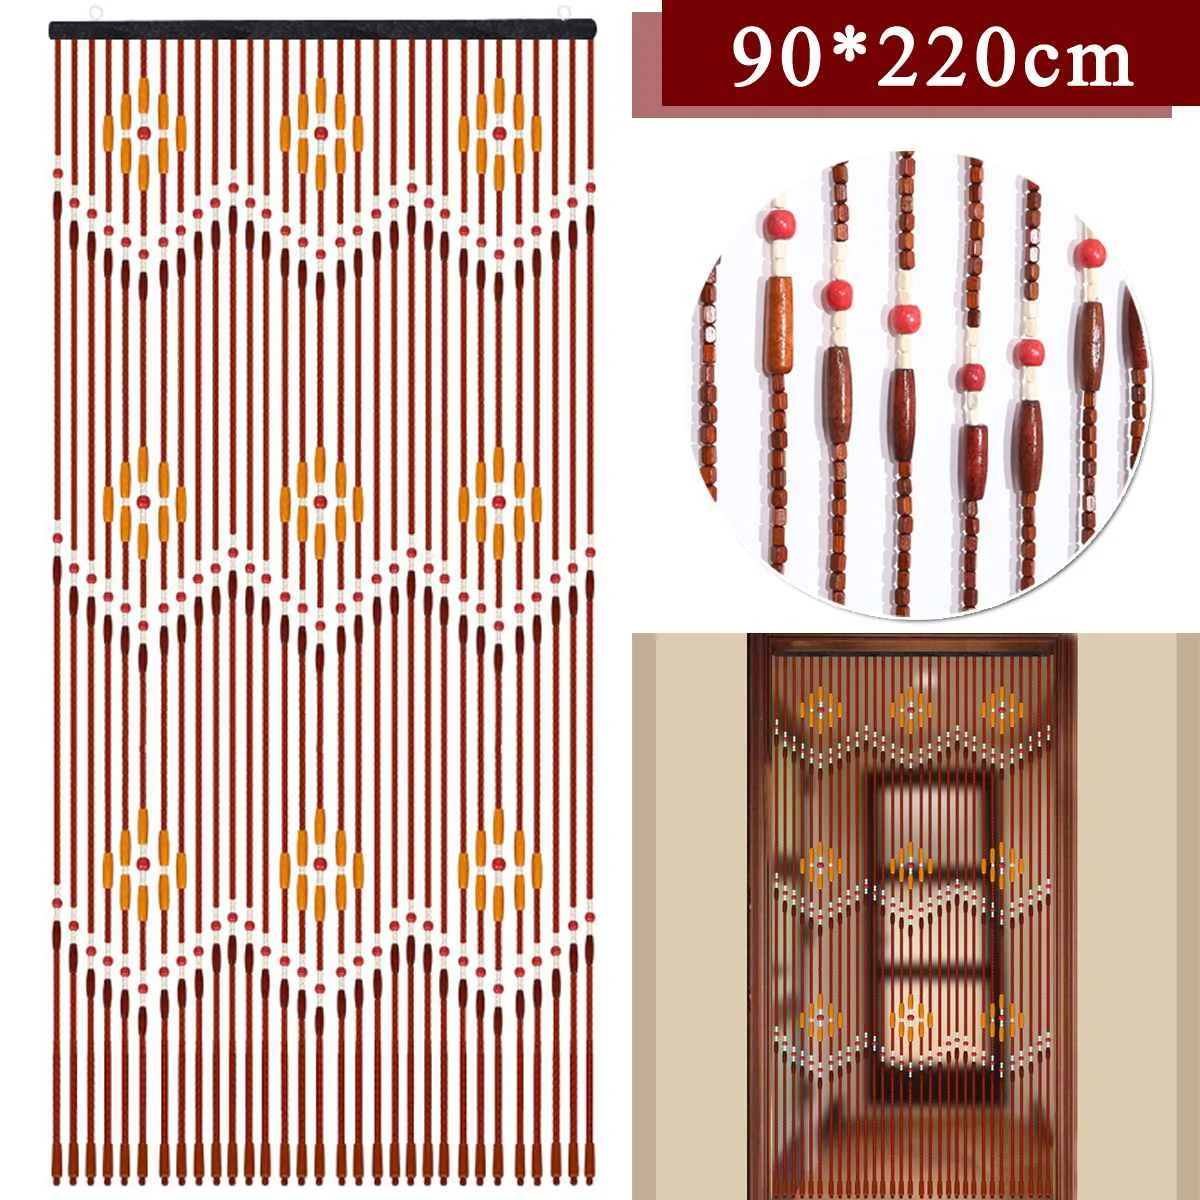 

90x220cm 31 Line Wave Wooden Beads Curtain Handmade Fly Screen Wooden Door Curtain Blinds For Porch Bedroom Living Room Divider